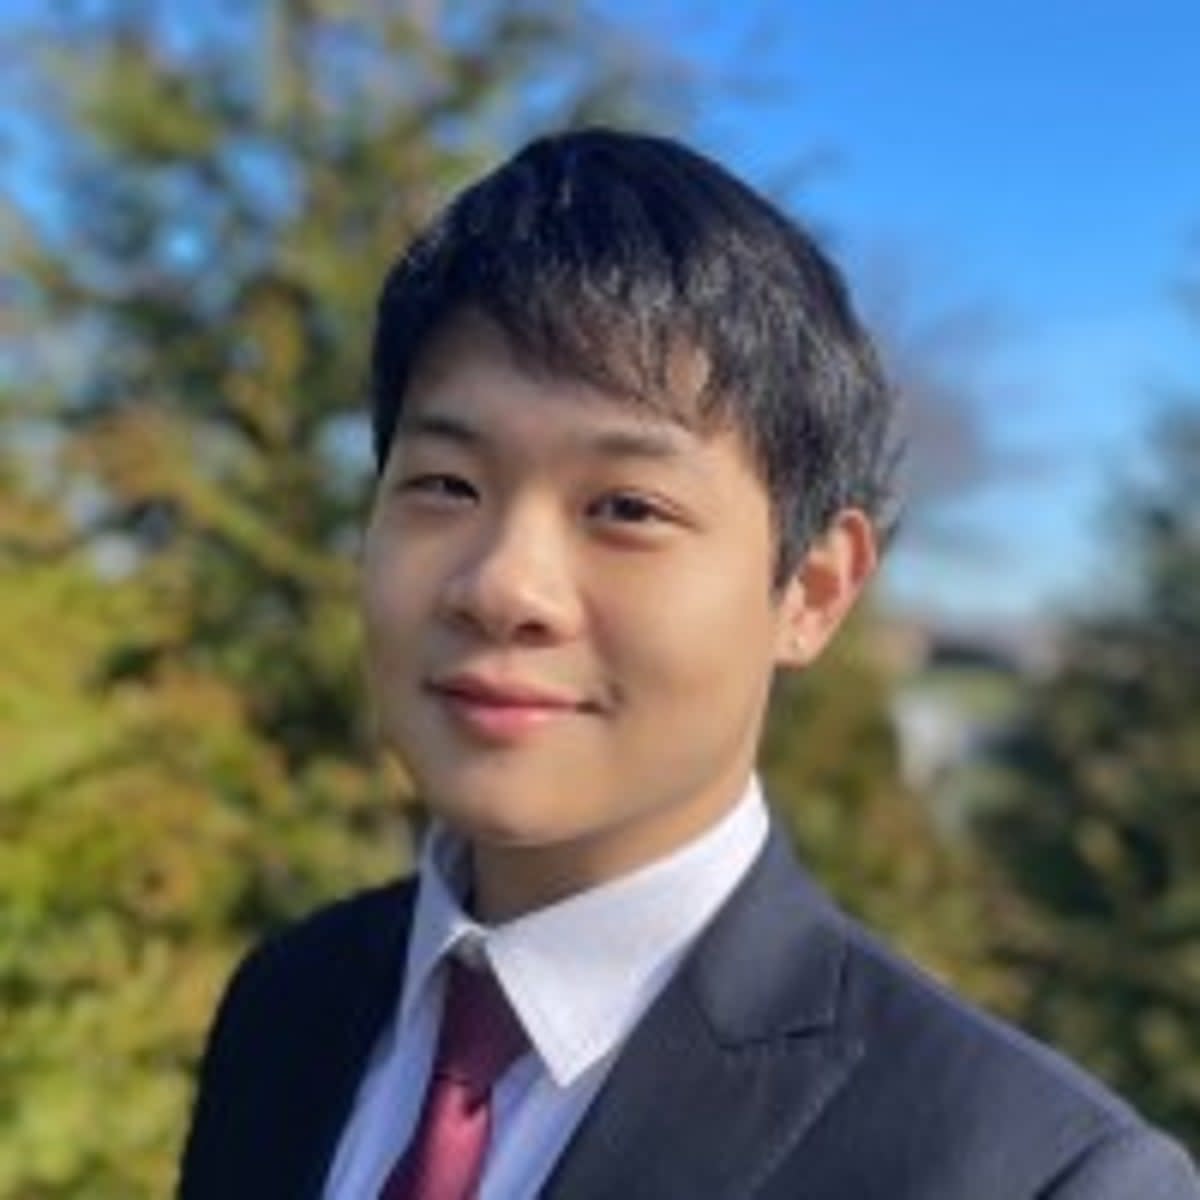 Won Jang, a 20-year-old Dartmouth student, died over the weekend following a Greek life event that involved alcohol. His body was pulled from the Connecticut River on Sunday (LinkedIn )